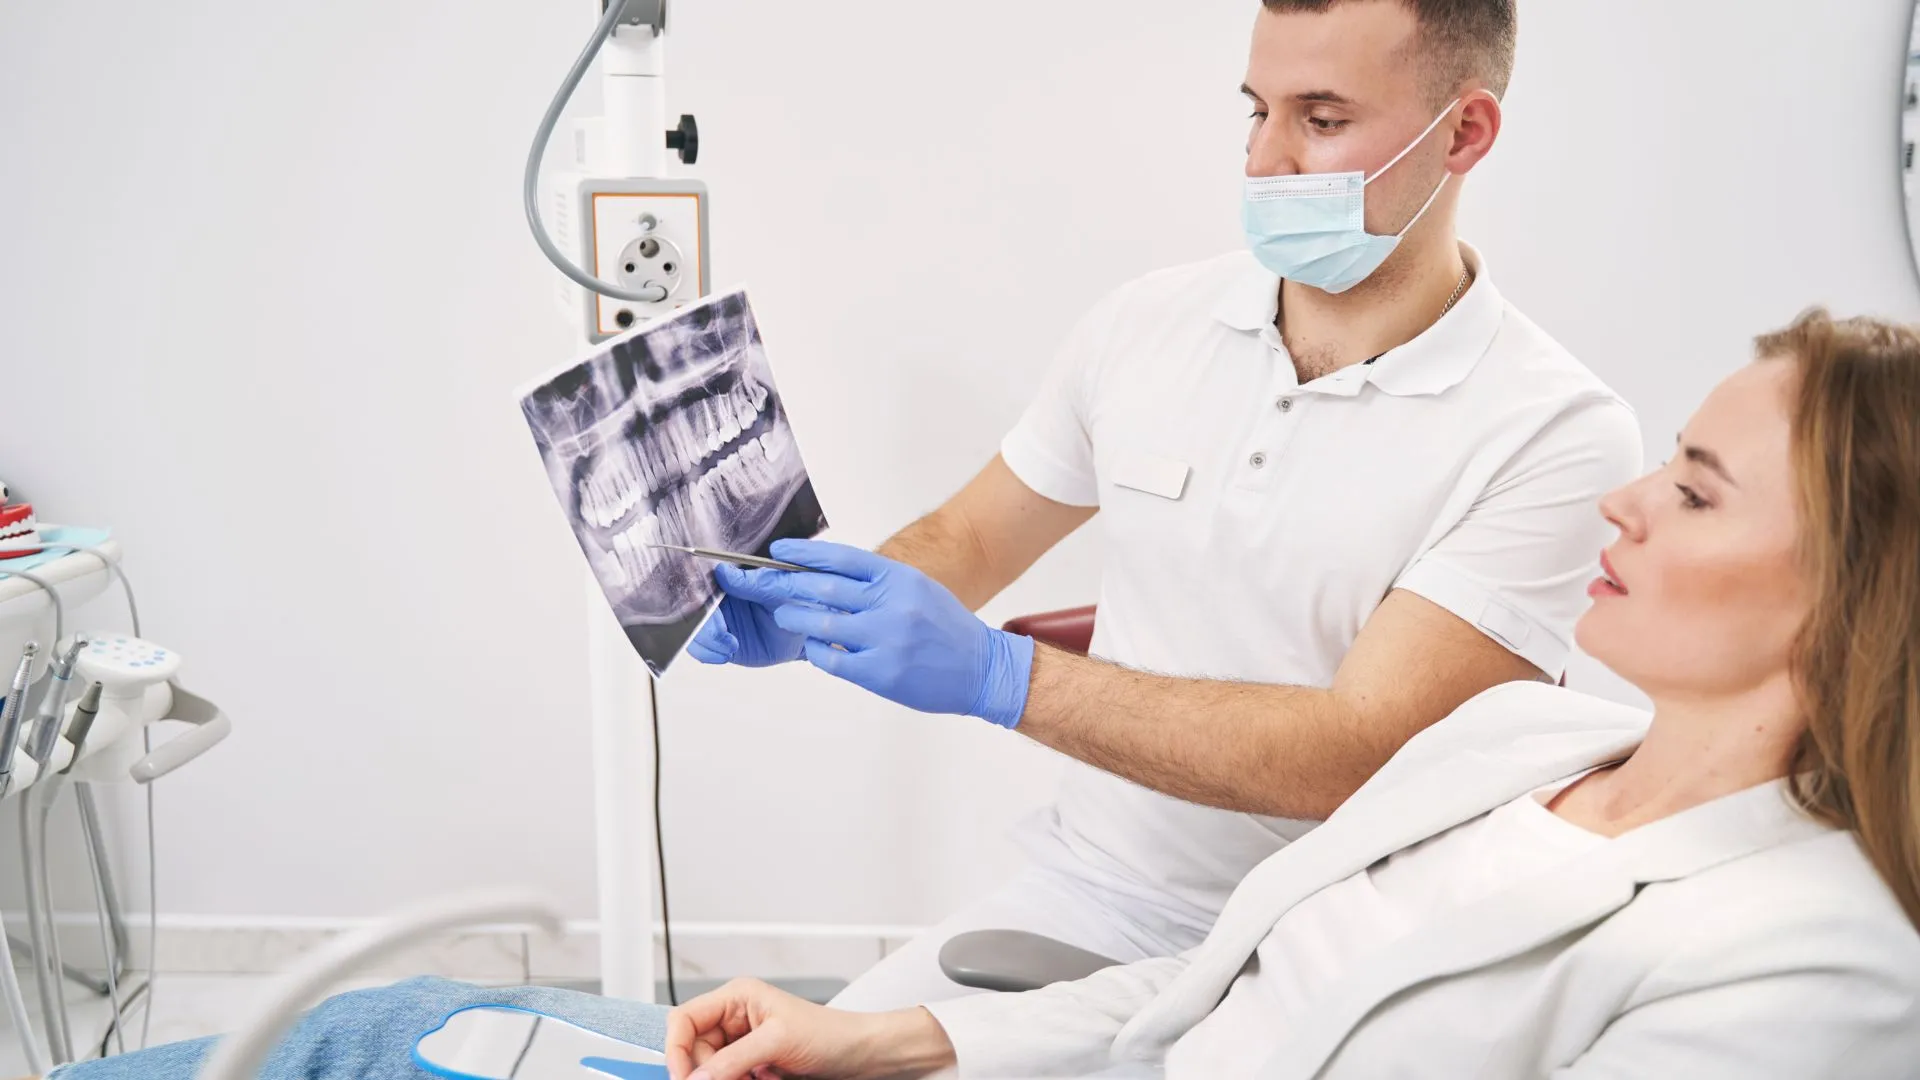 Root Canal Therapy Explained